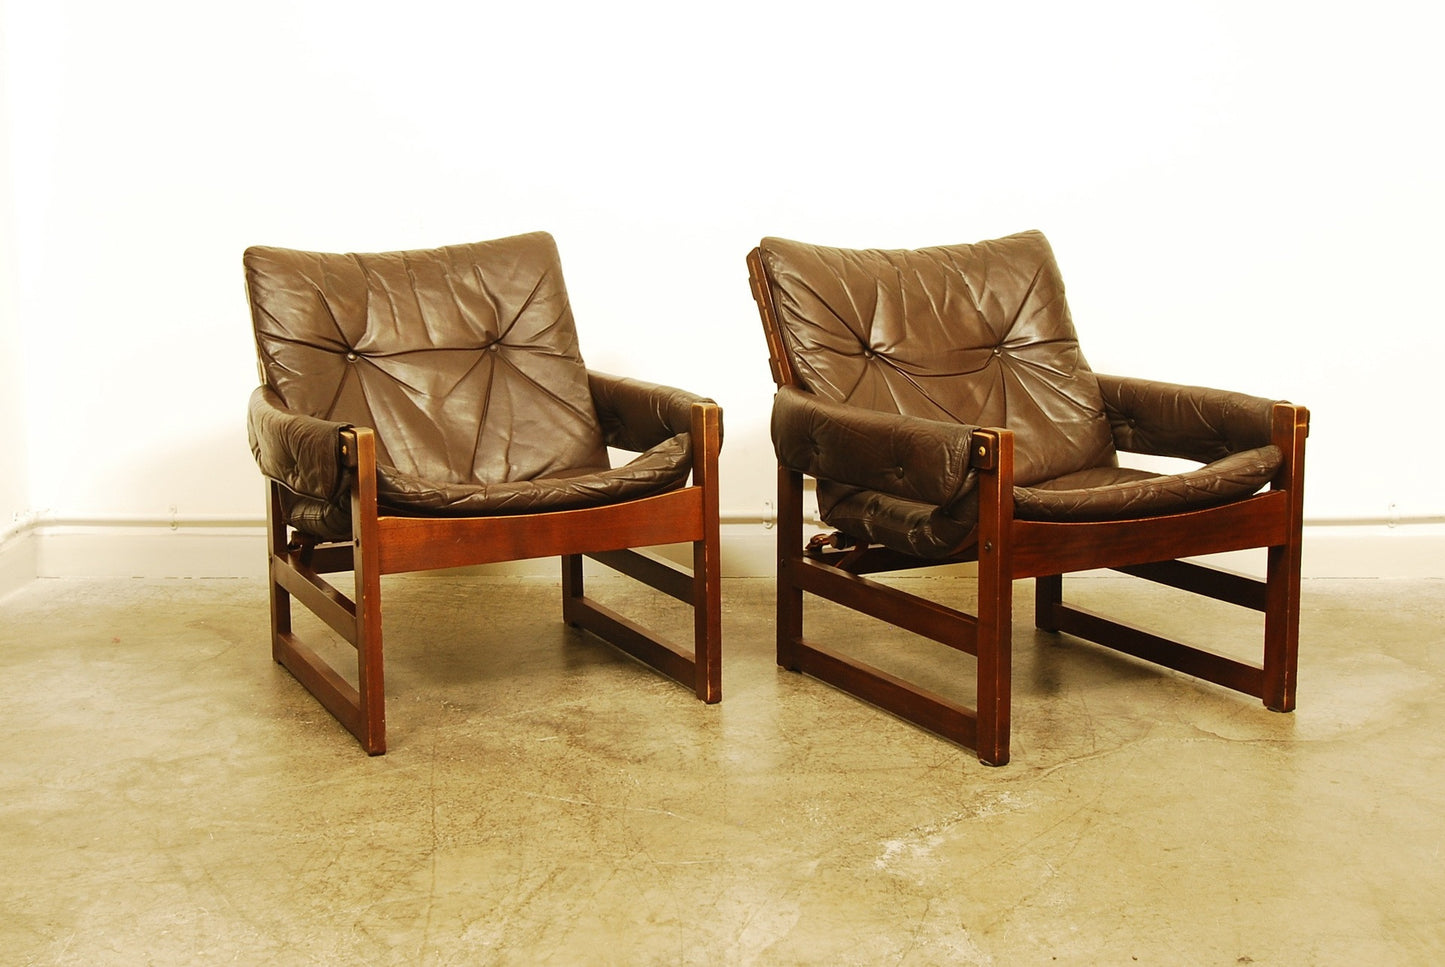 Pair of stained beech lounge chairs